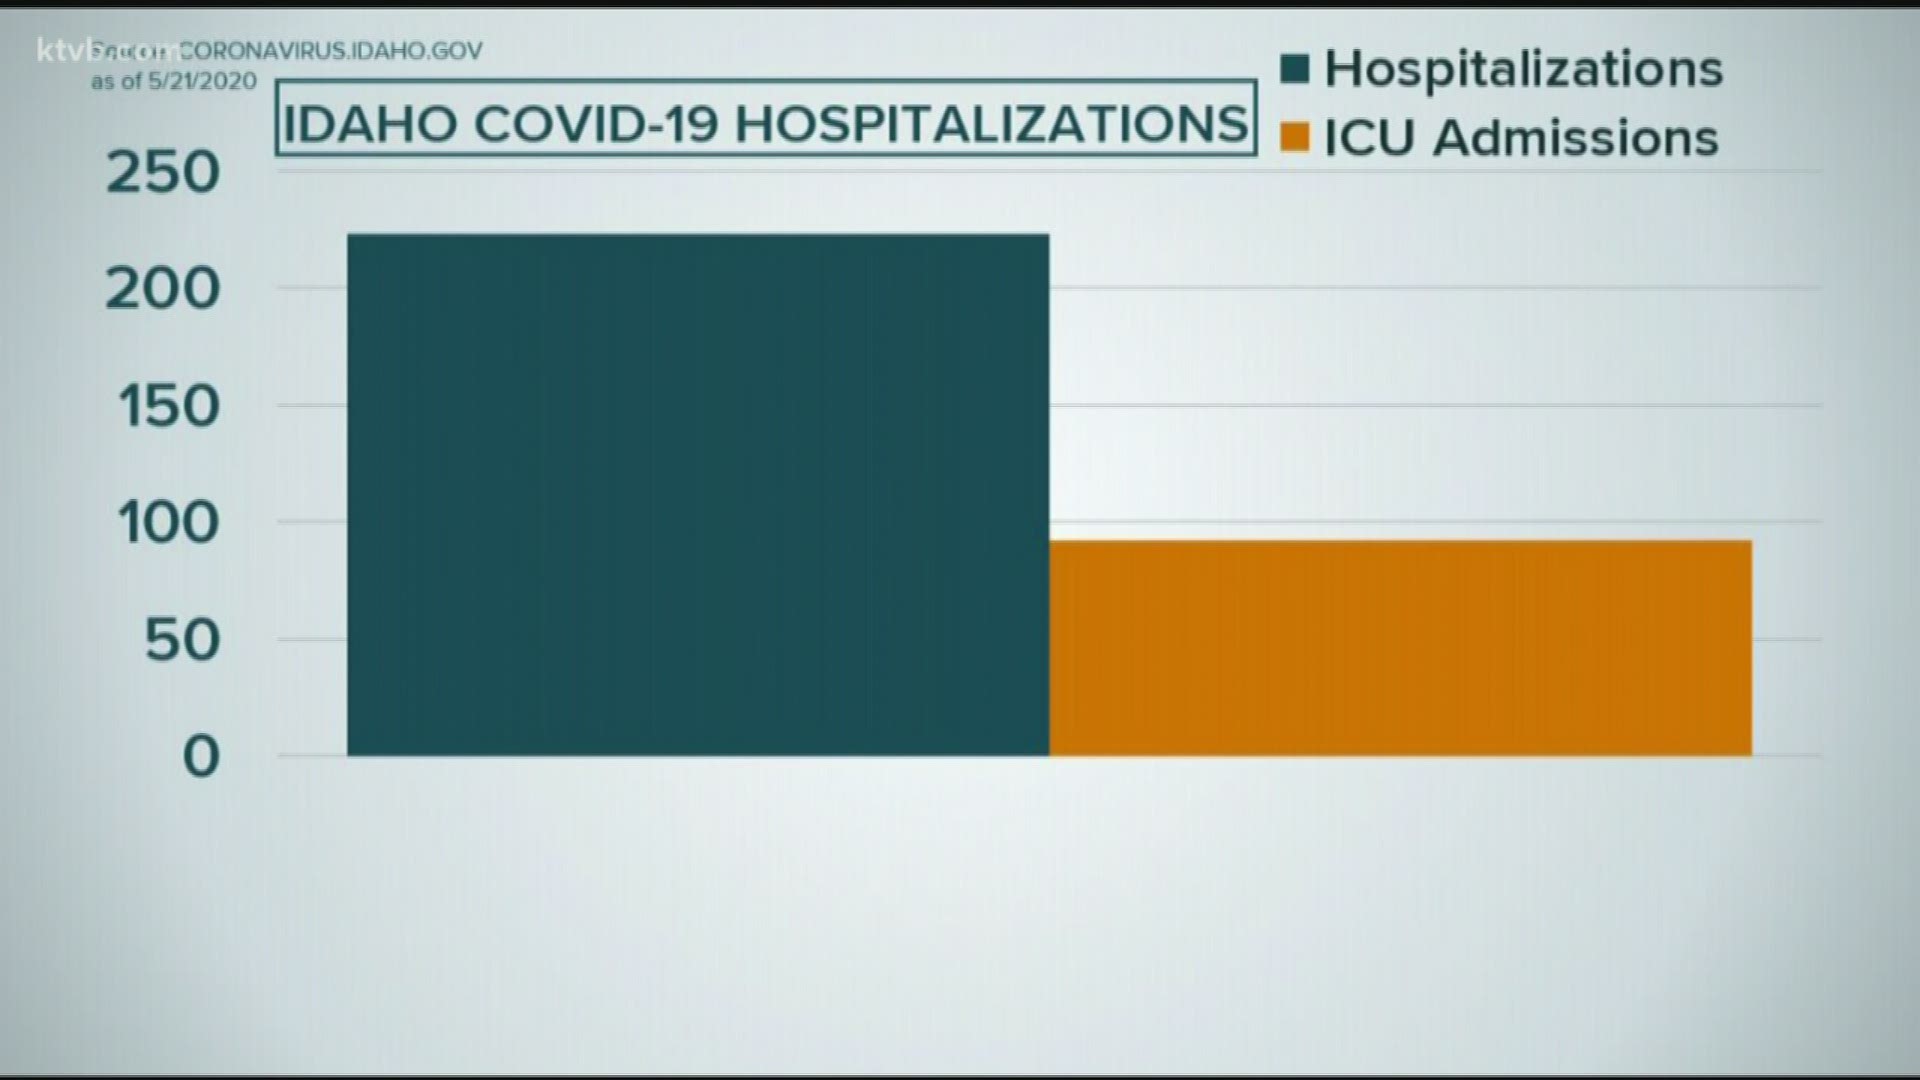 Mark Johnson looks at how many people have been hospitalized with COVID-19, as well as the preparedness of our hospitals, should the pandemic worsen.